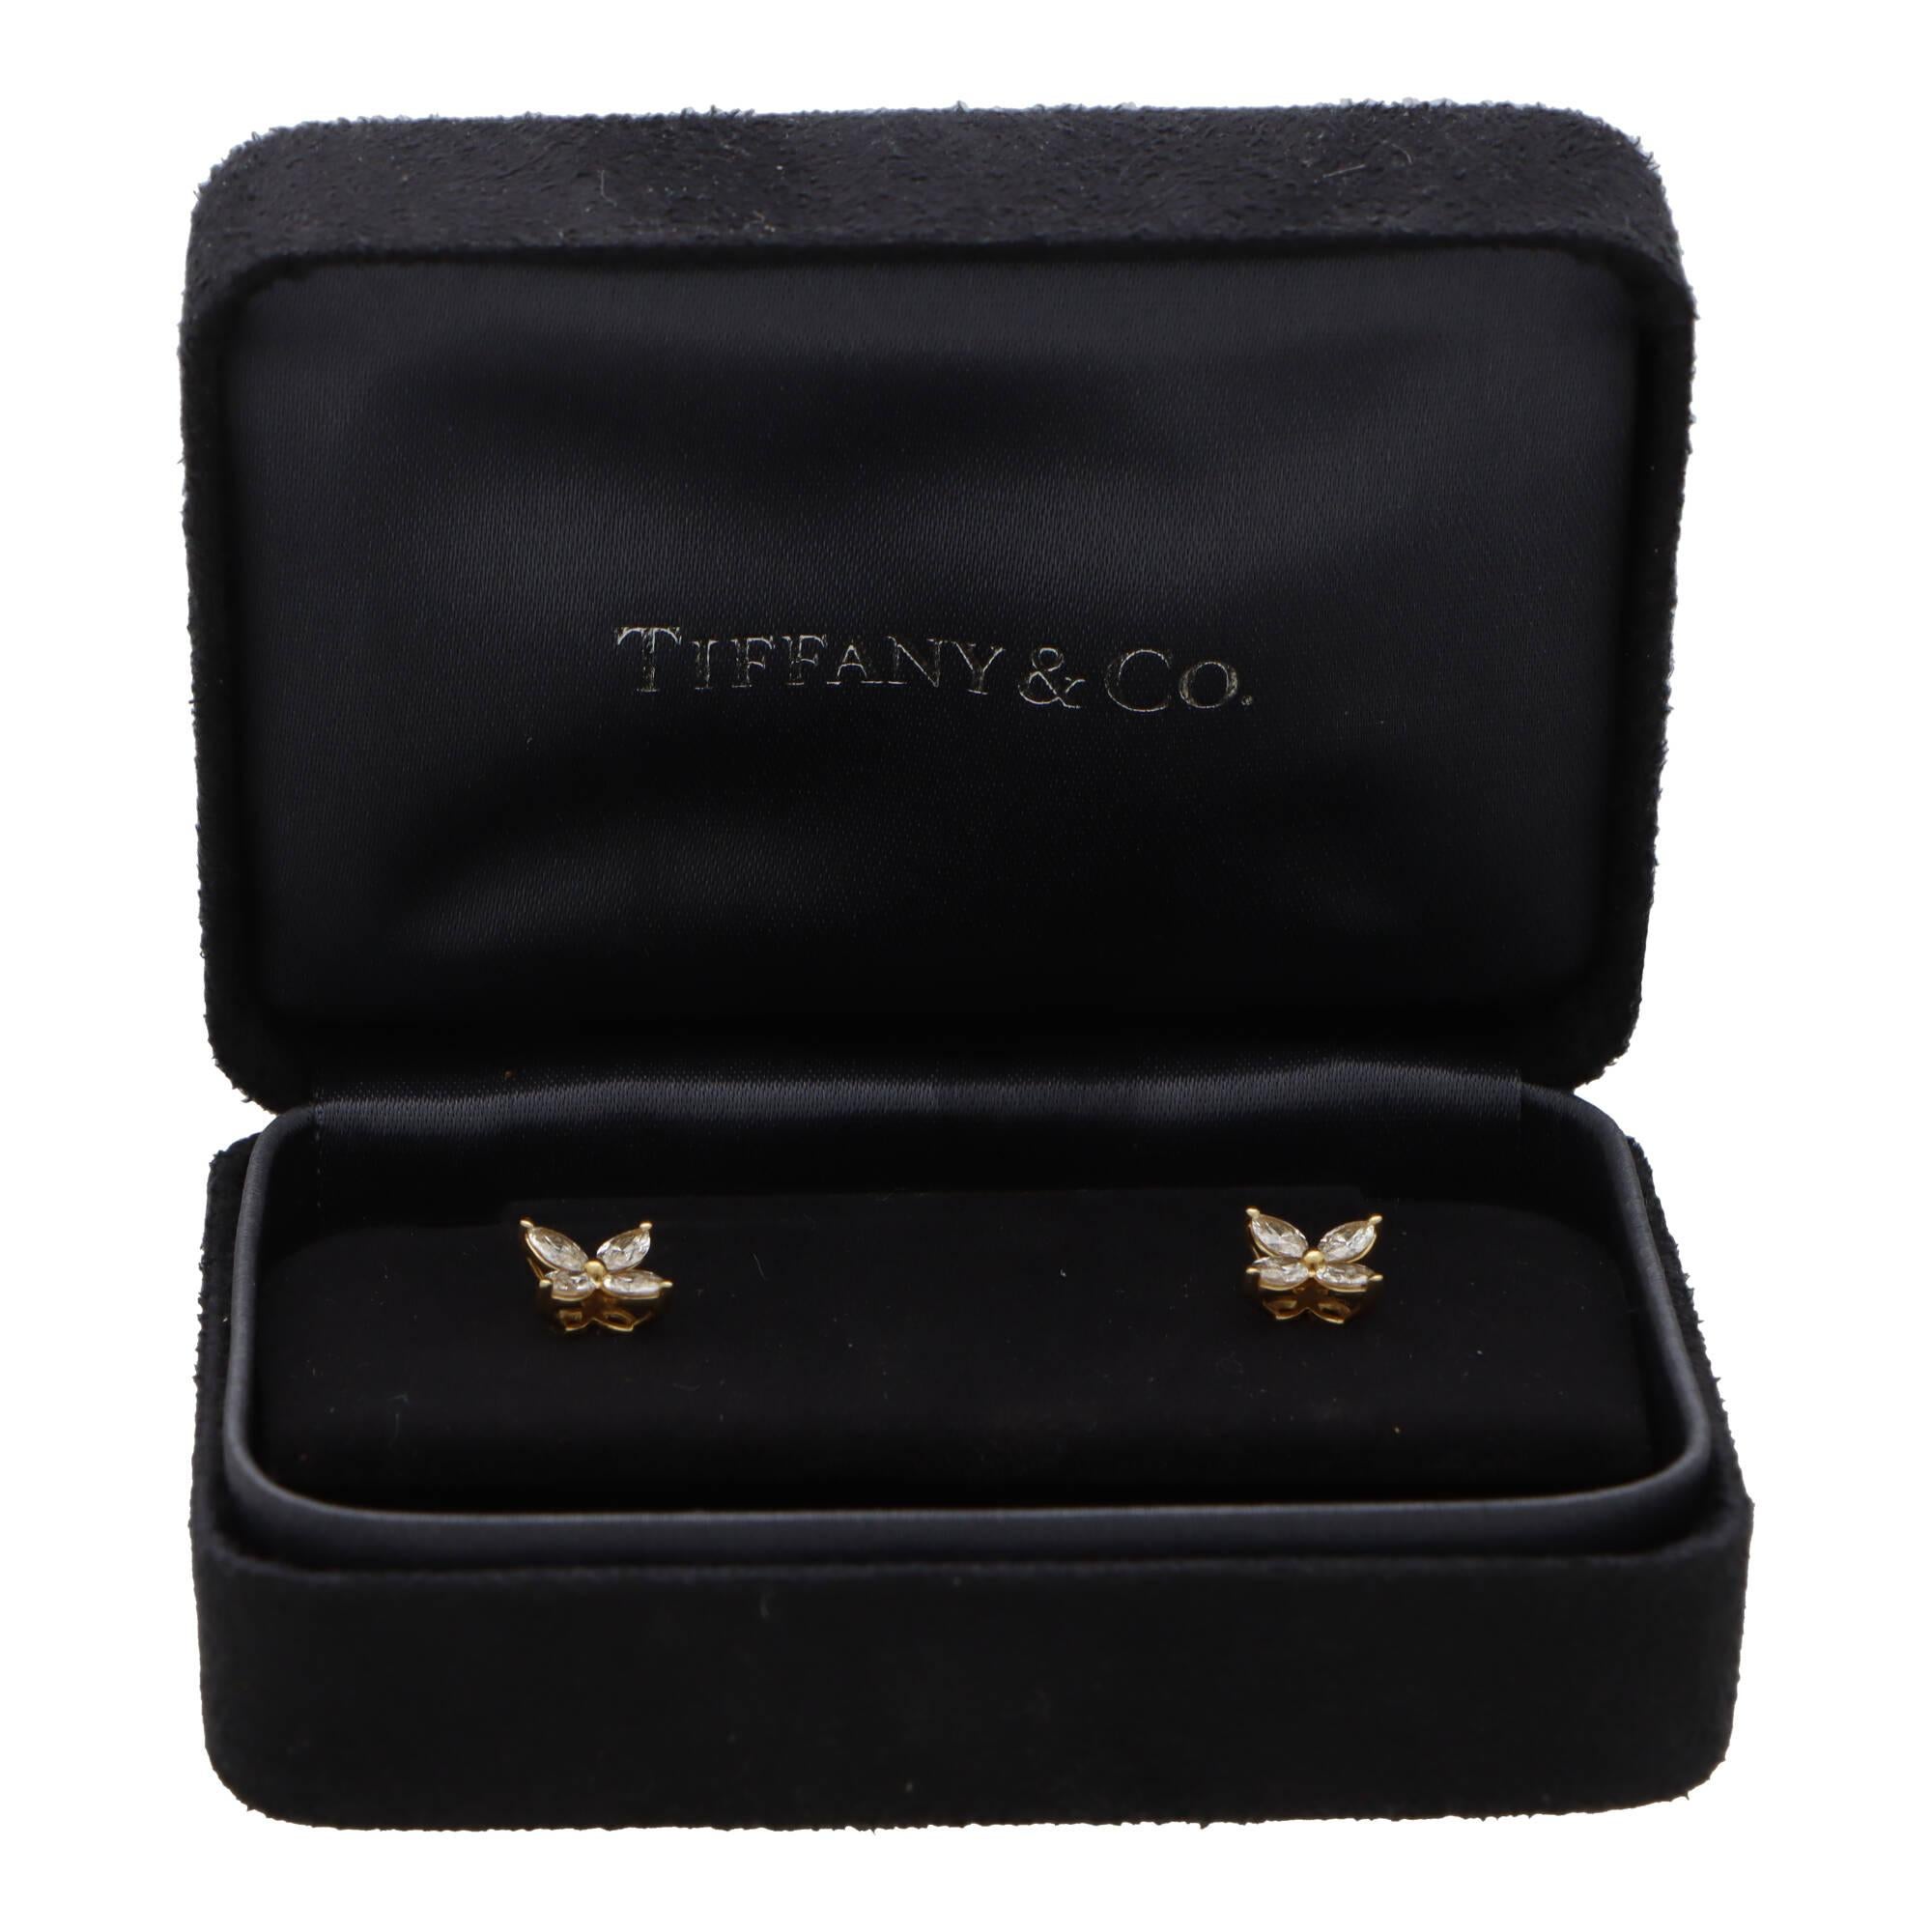  A beautiful pair of vintage Tiffany & Co. Victoria diamond stud earrings set in 18k yellow gold.

From the current Tiffany & Co. Victoria collection, each earring features four marquise cut diamonds in the iconic Victoria motif. Each marquise is